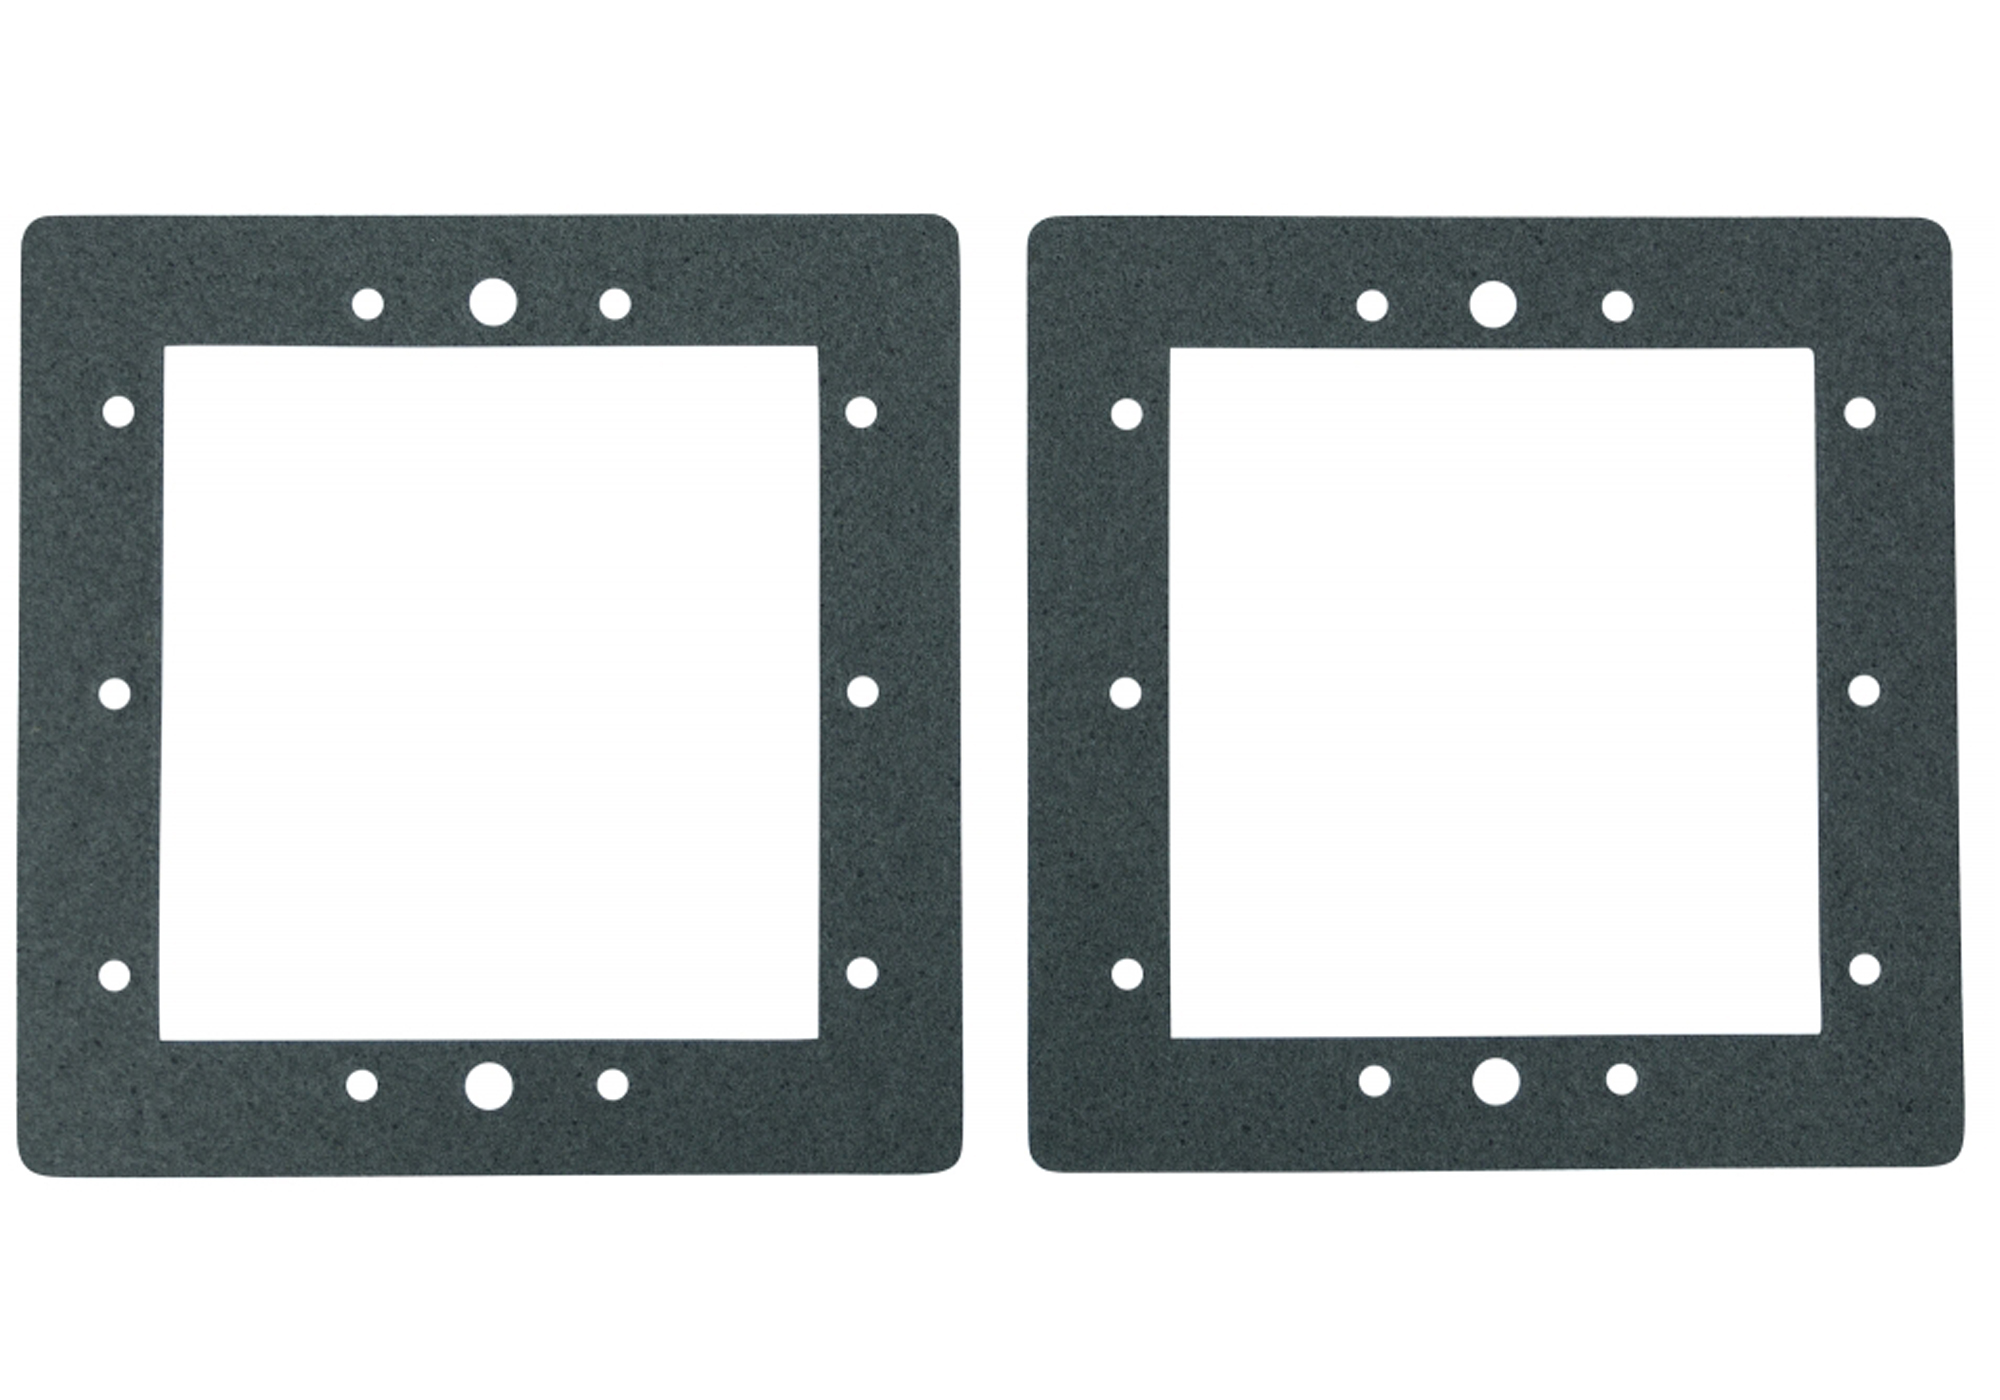 Replacement Pool Skimmer Gaskets for use with Kayak Pools- 2-Pack - image 1 of 2